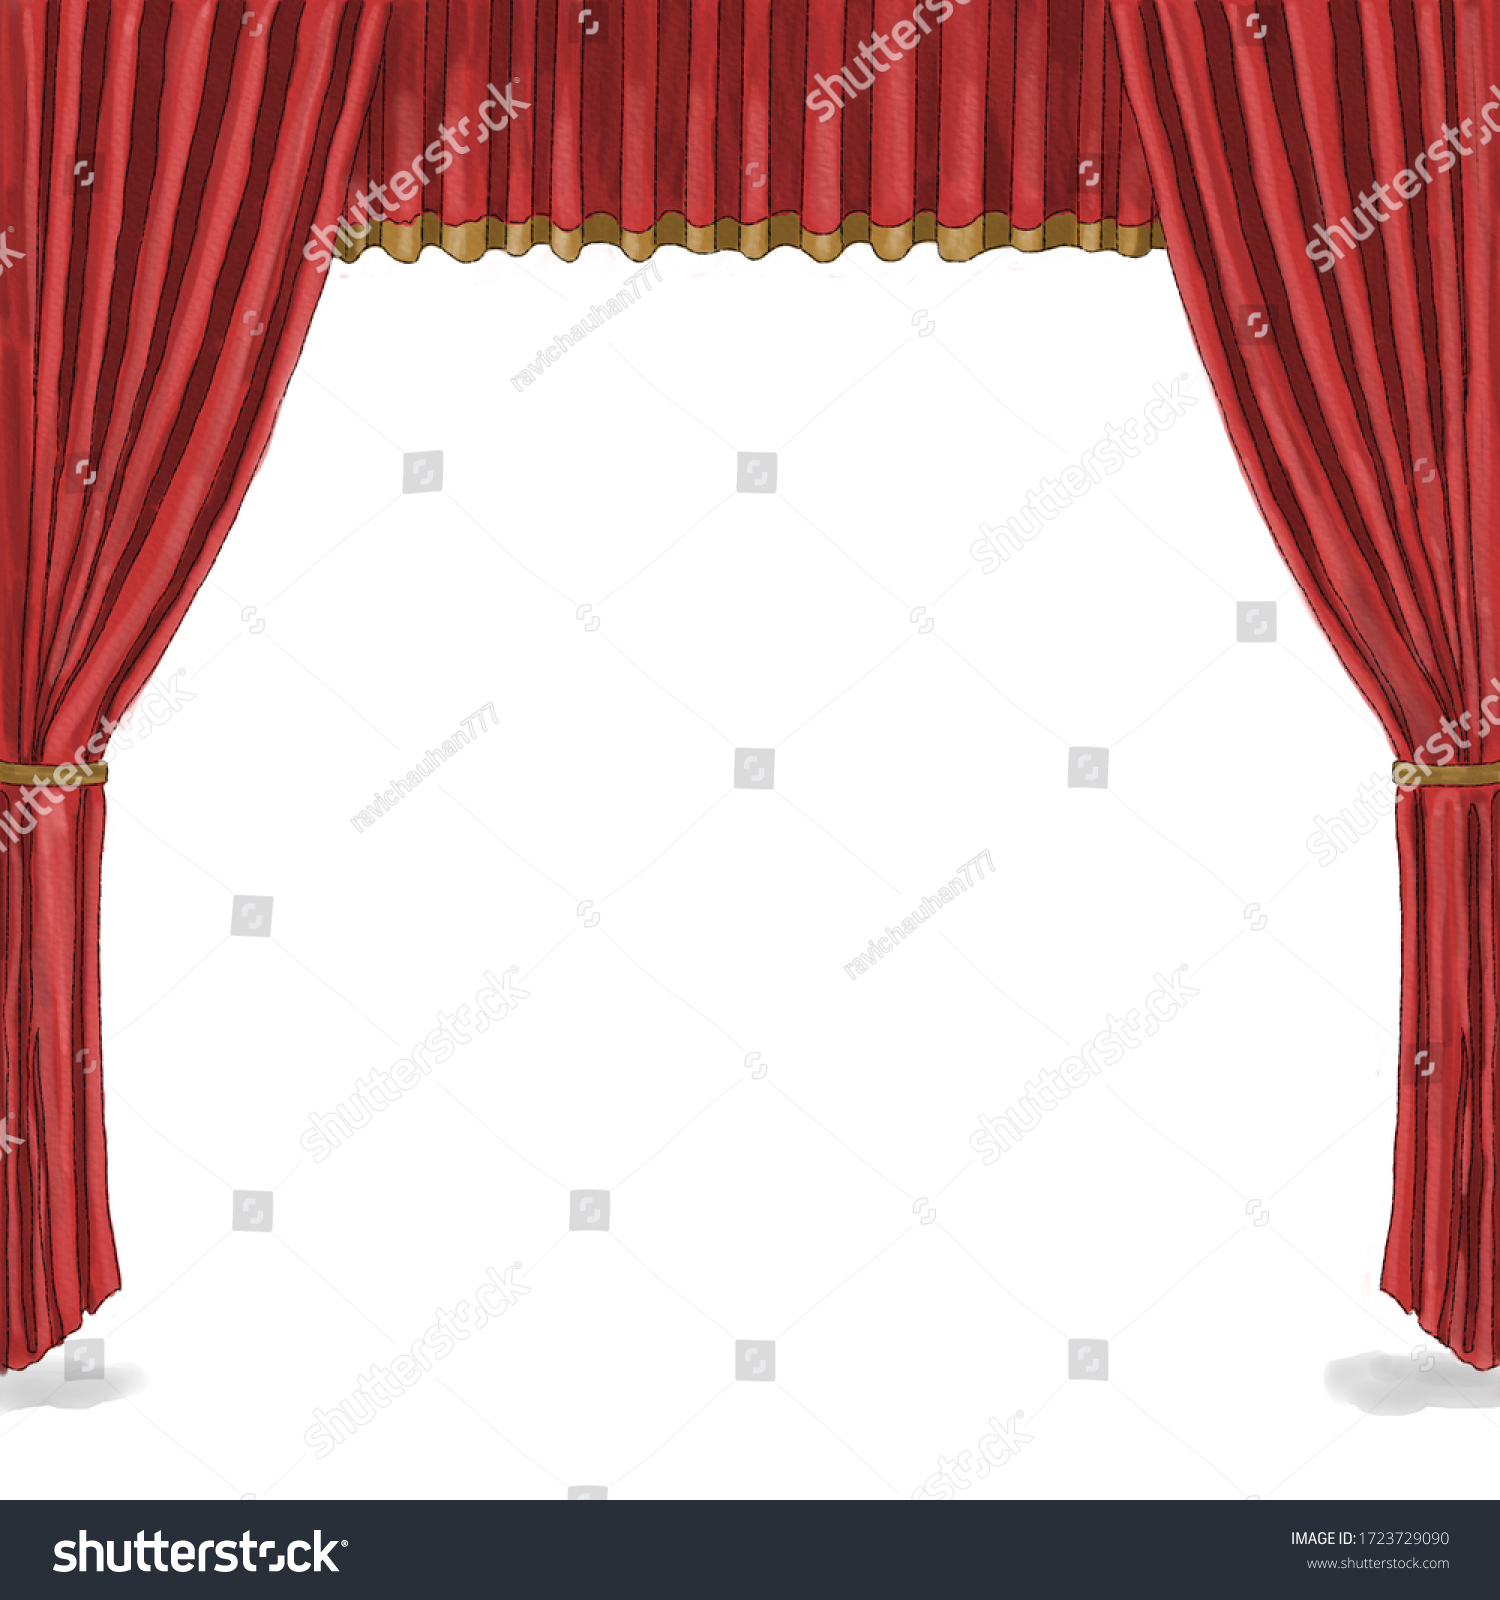 Red Stage Curtain Hand Drawn Watercolor Stock Illustration 1723729090 ...